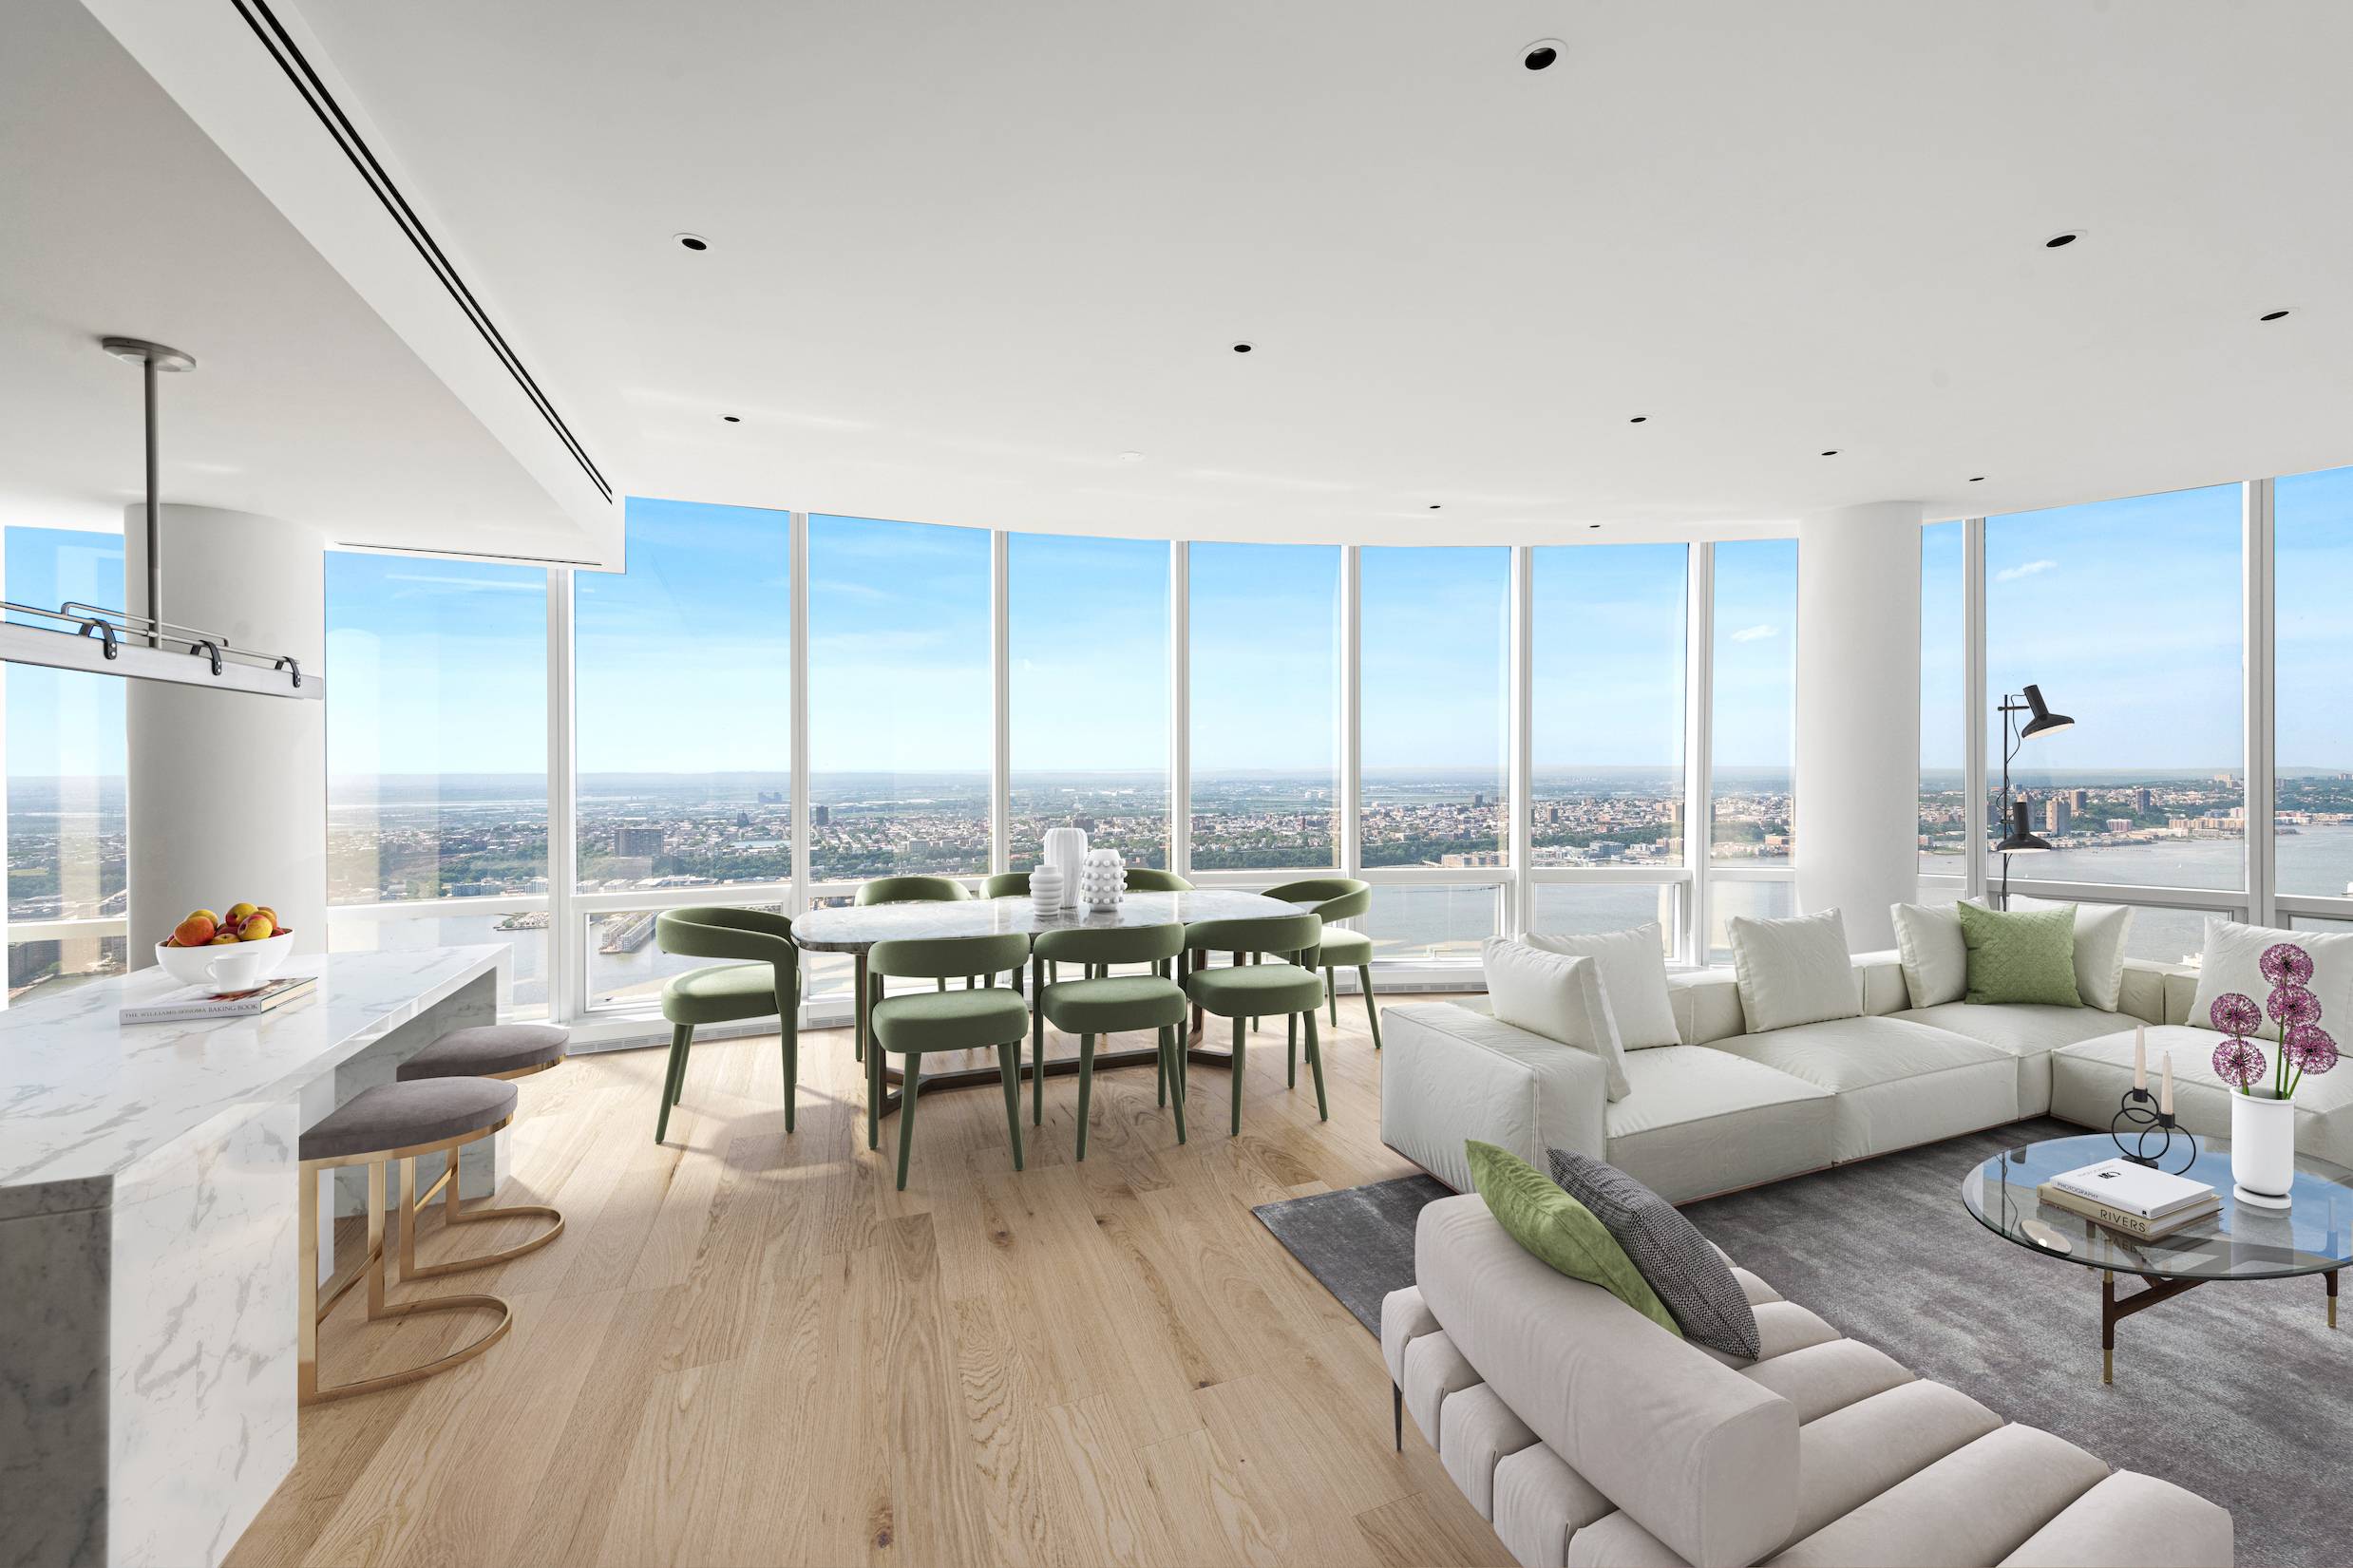 Welcome to this sublime corner condo perched high above the Hudson River in the ultra luxurious Hudson Yards neighborhood, a stunning 3 bedroom, 3.